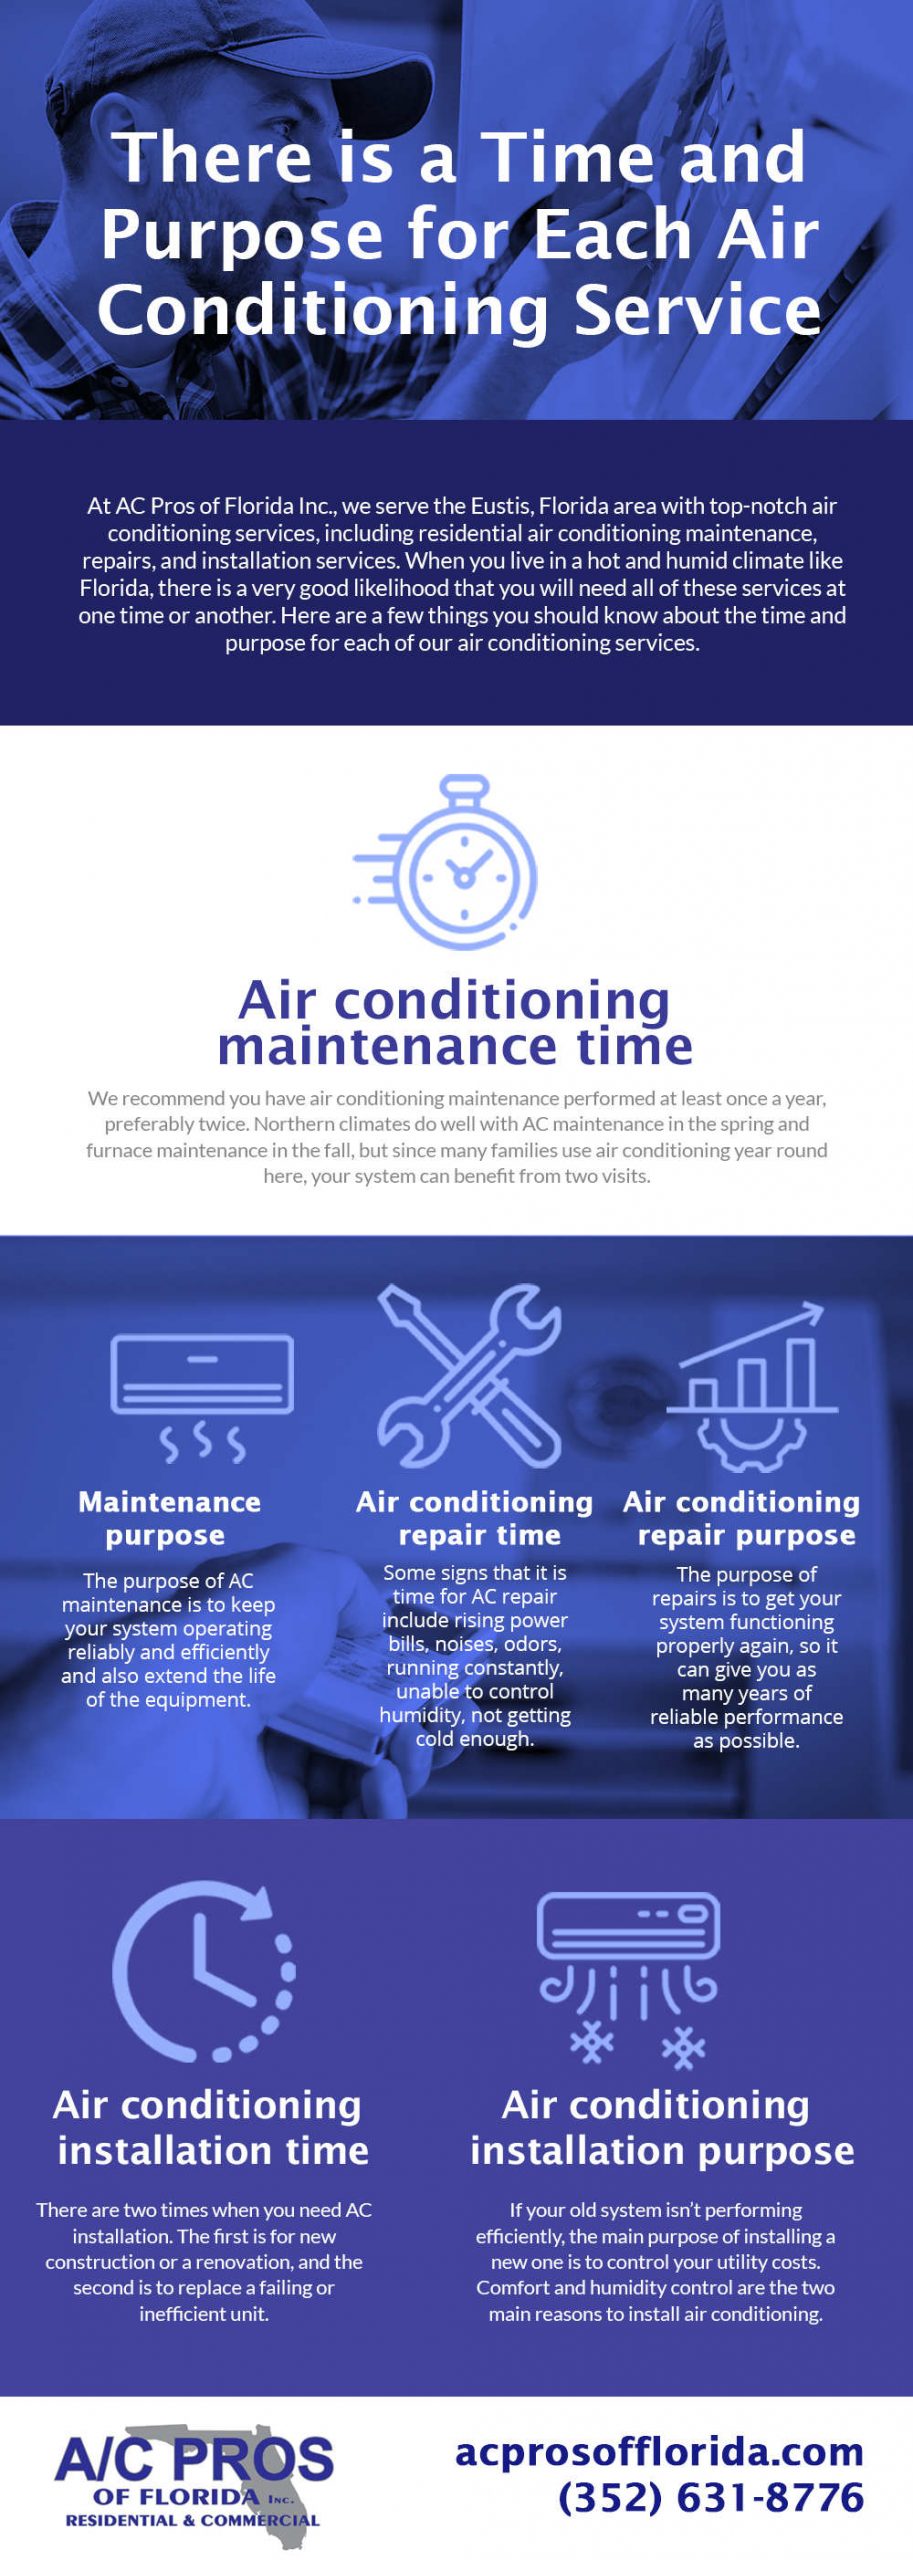 There is a Time and Purpose for Each Air Conditioning Service [infographic]